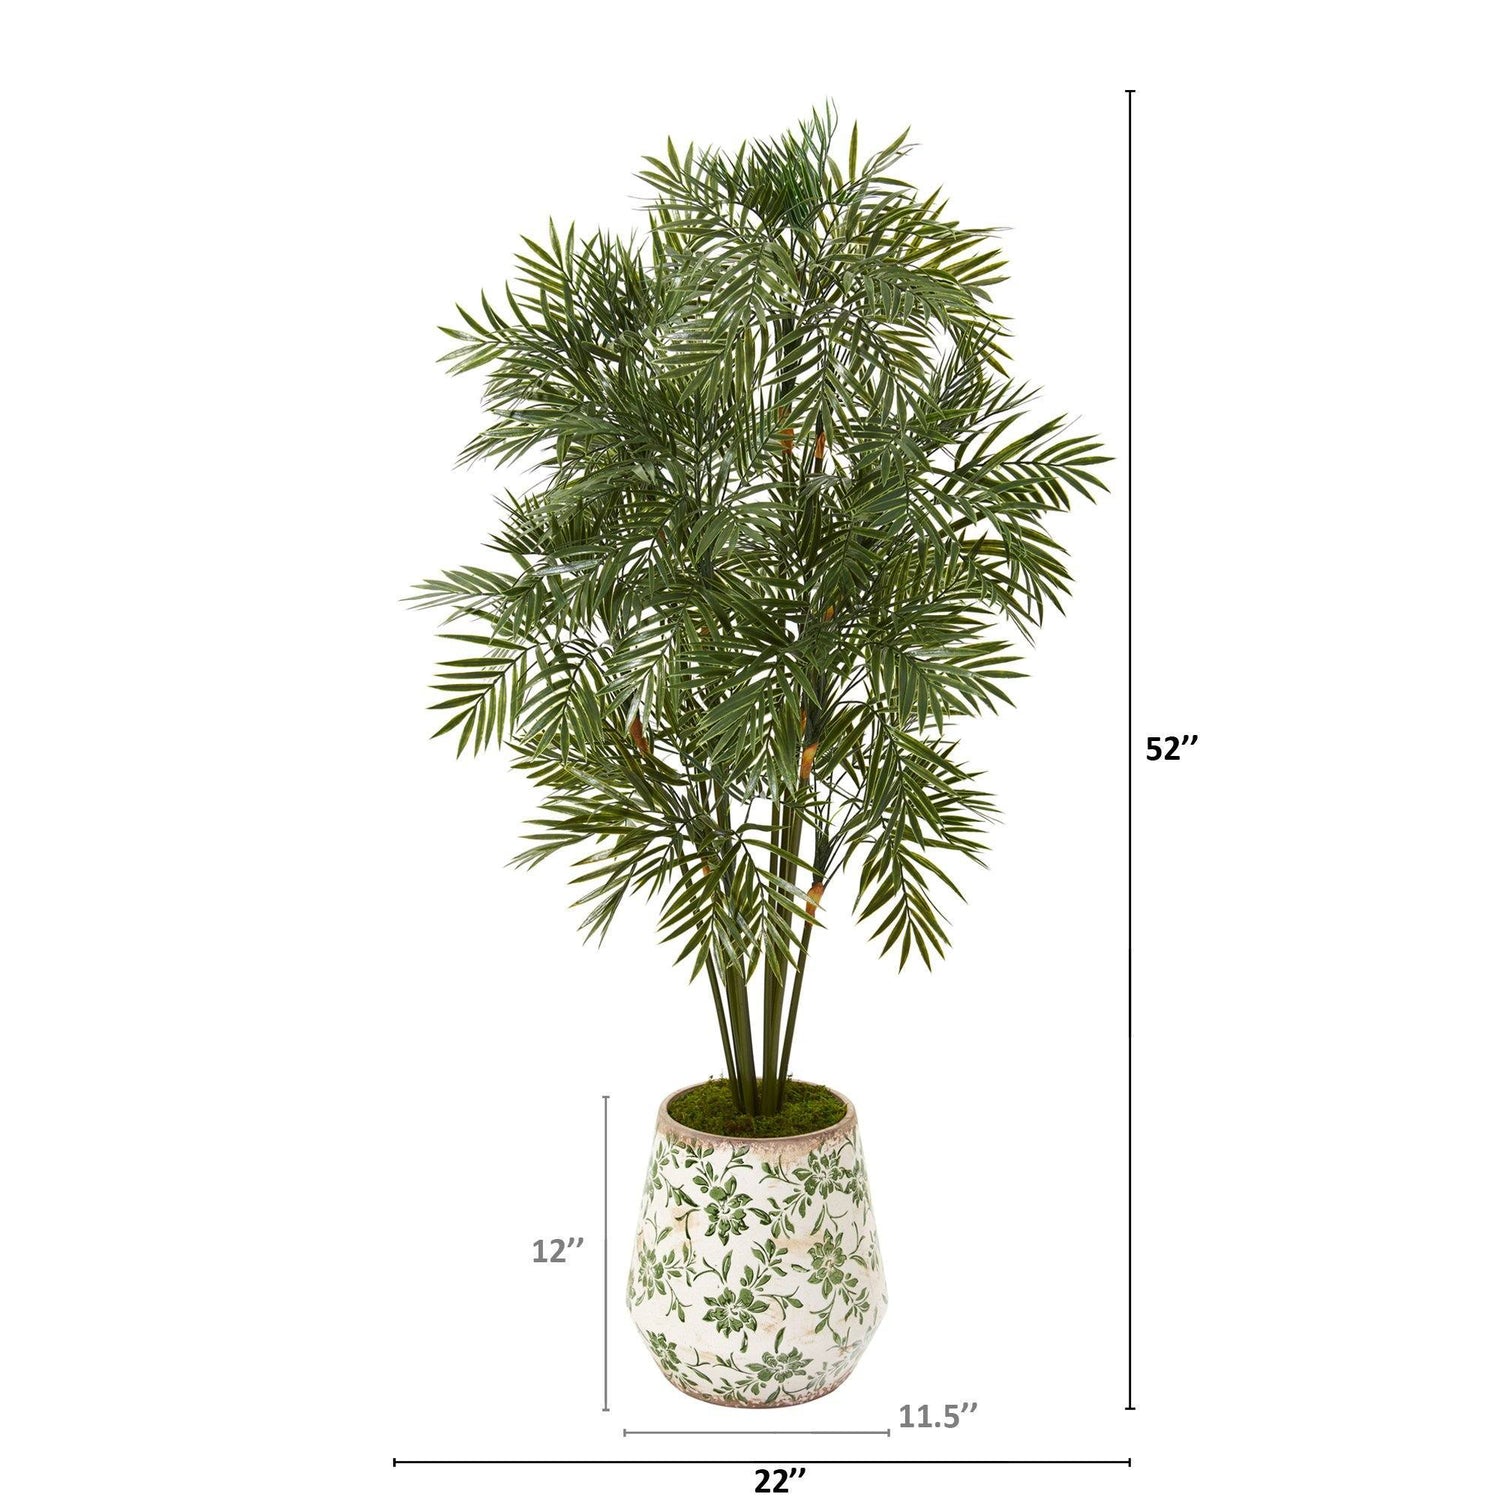 52” Parlor Palm Artificial Tree in Floral Print Planter